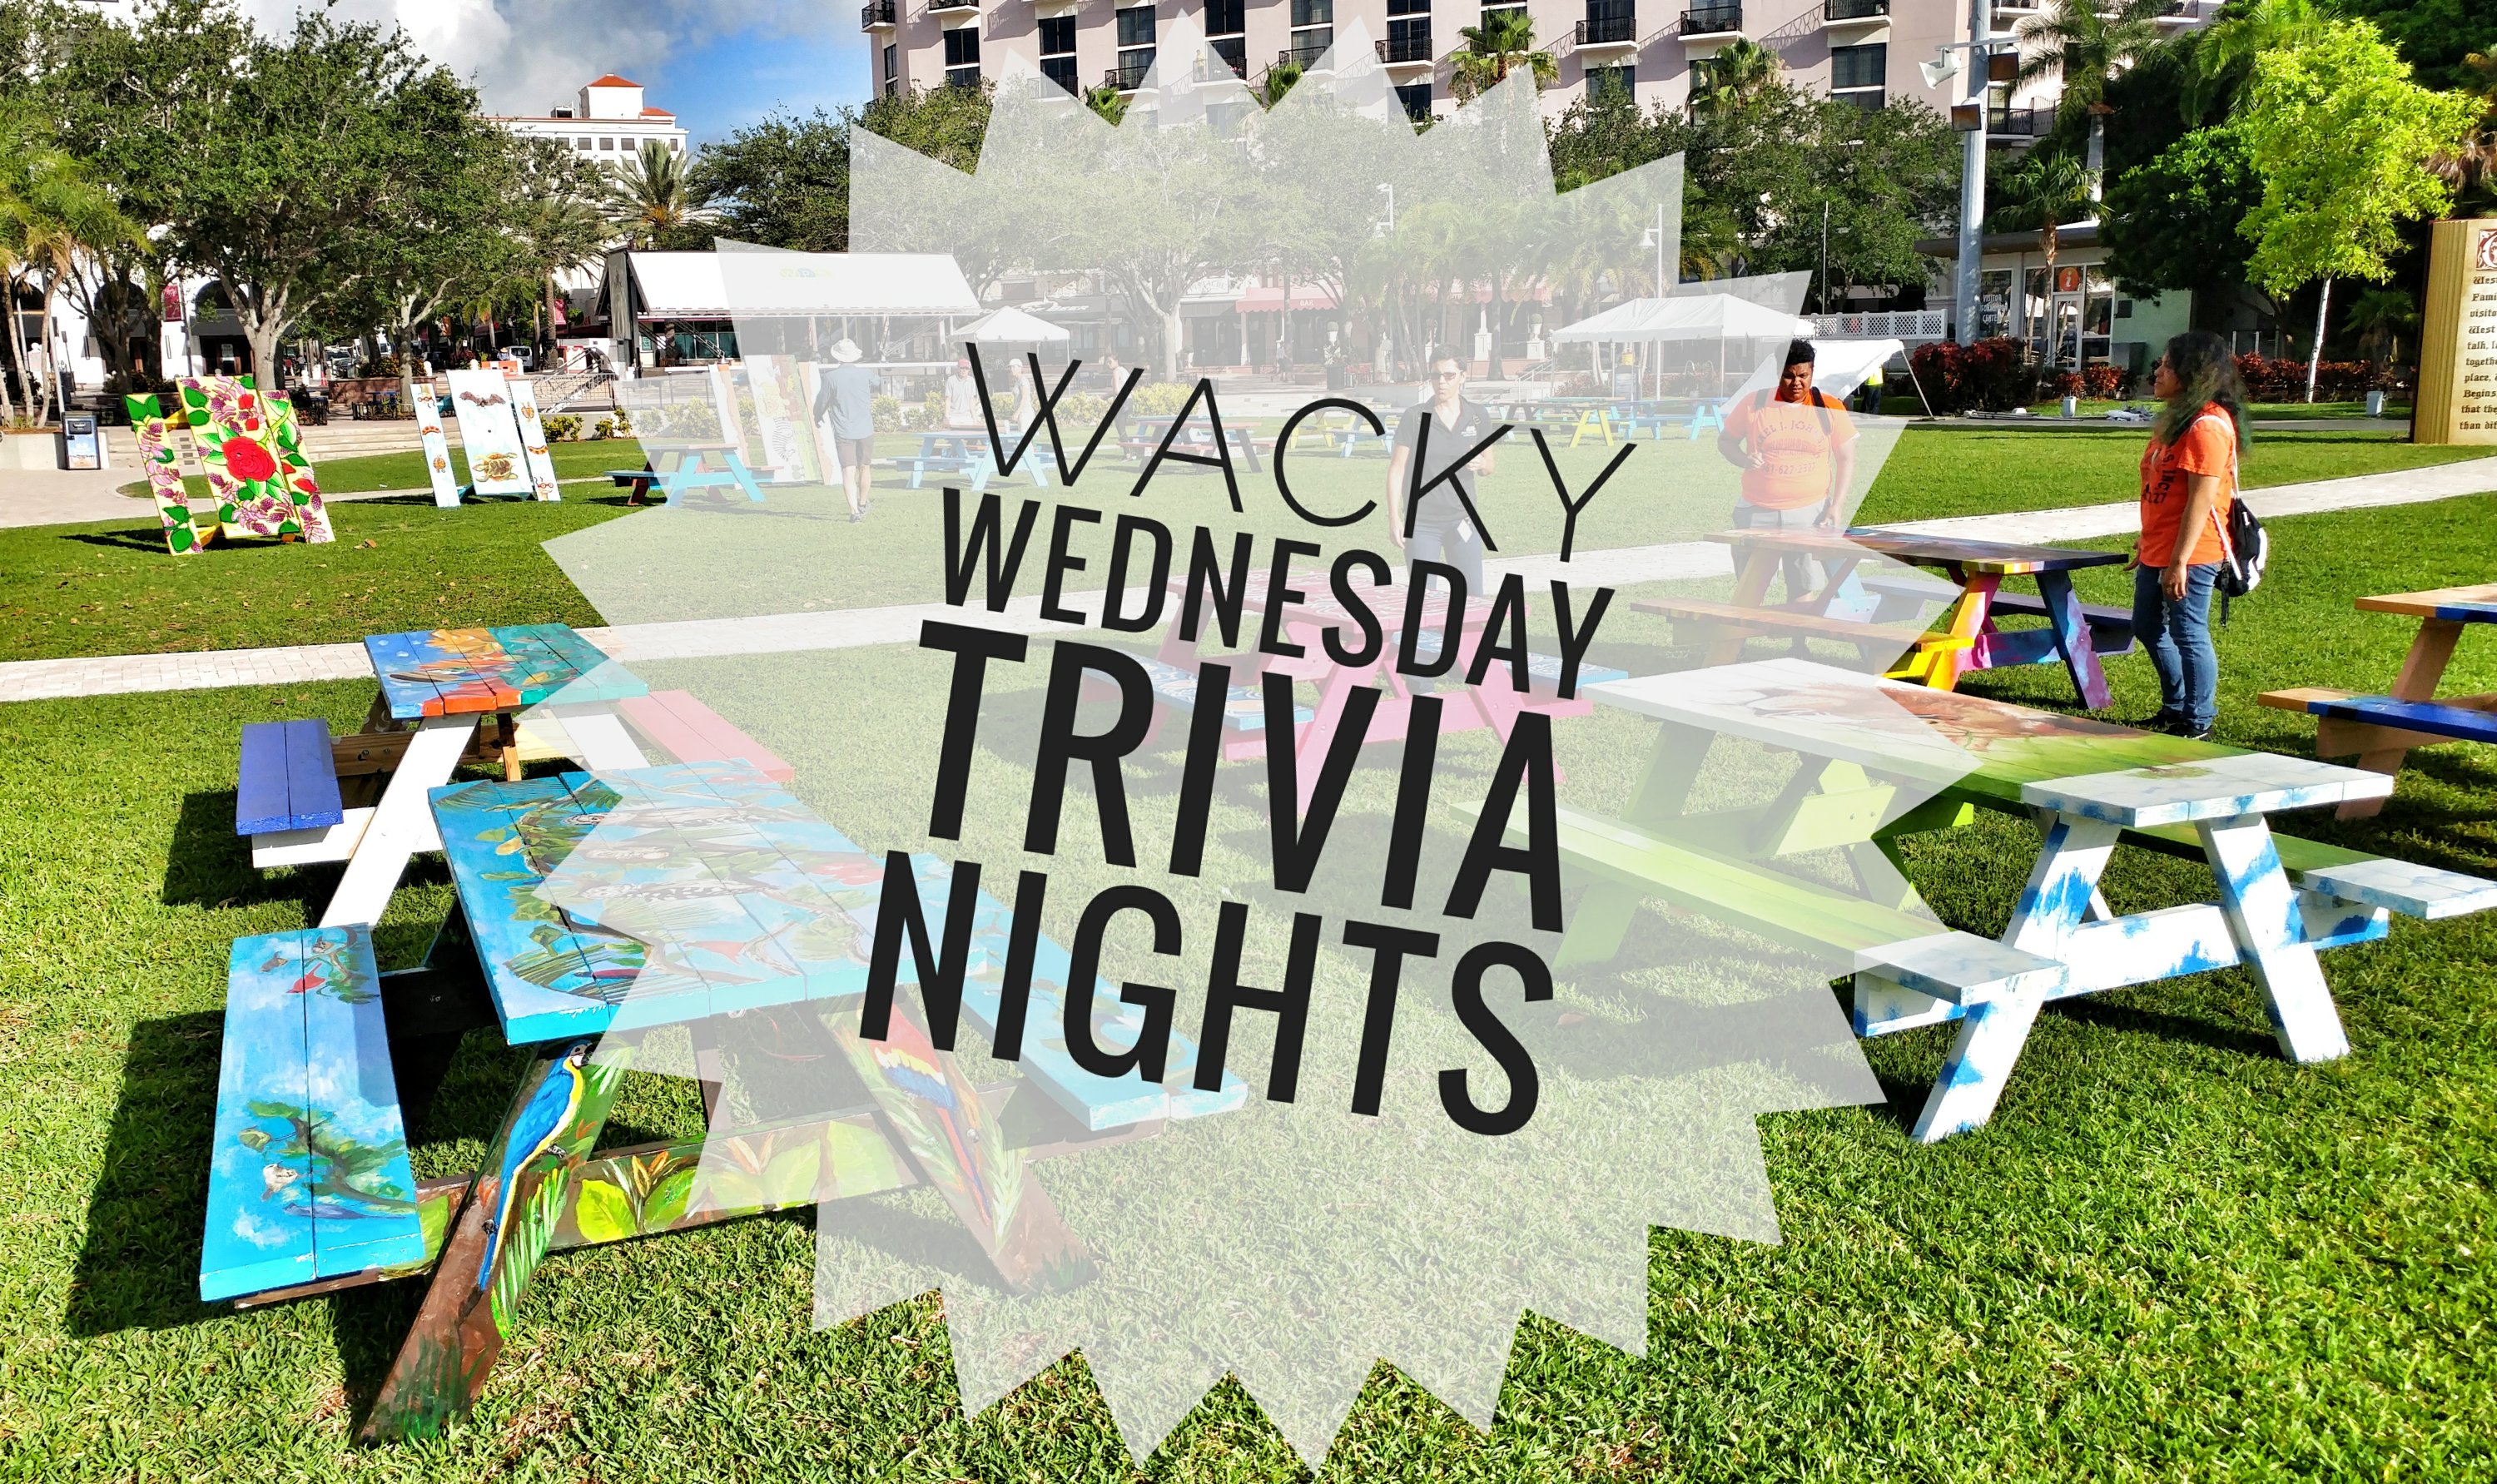 Wacky Wednesday Trivia starting at the Waterfront Tomorrow